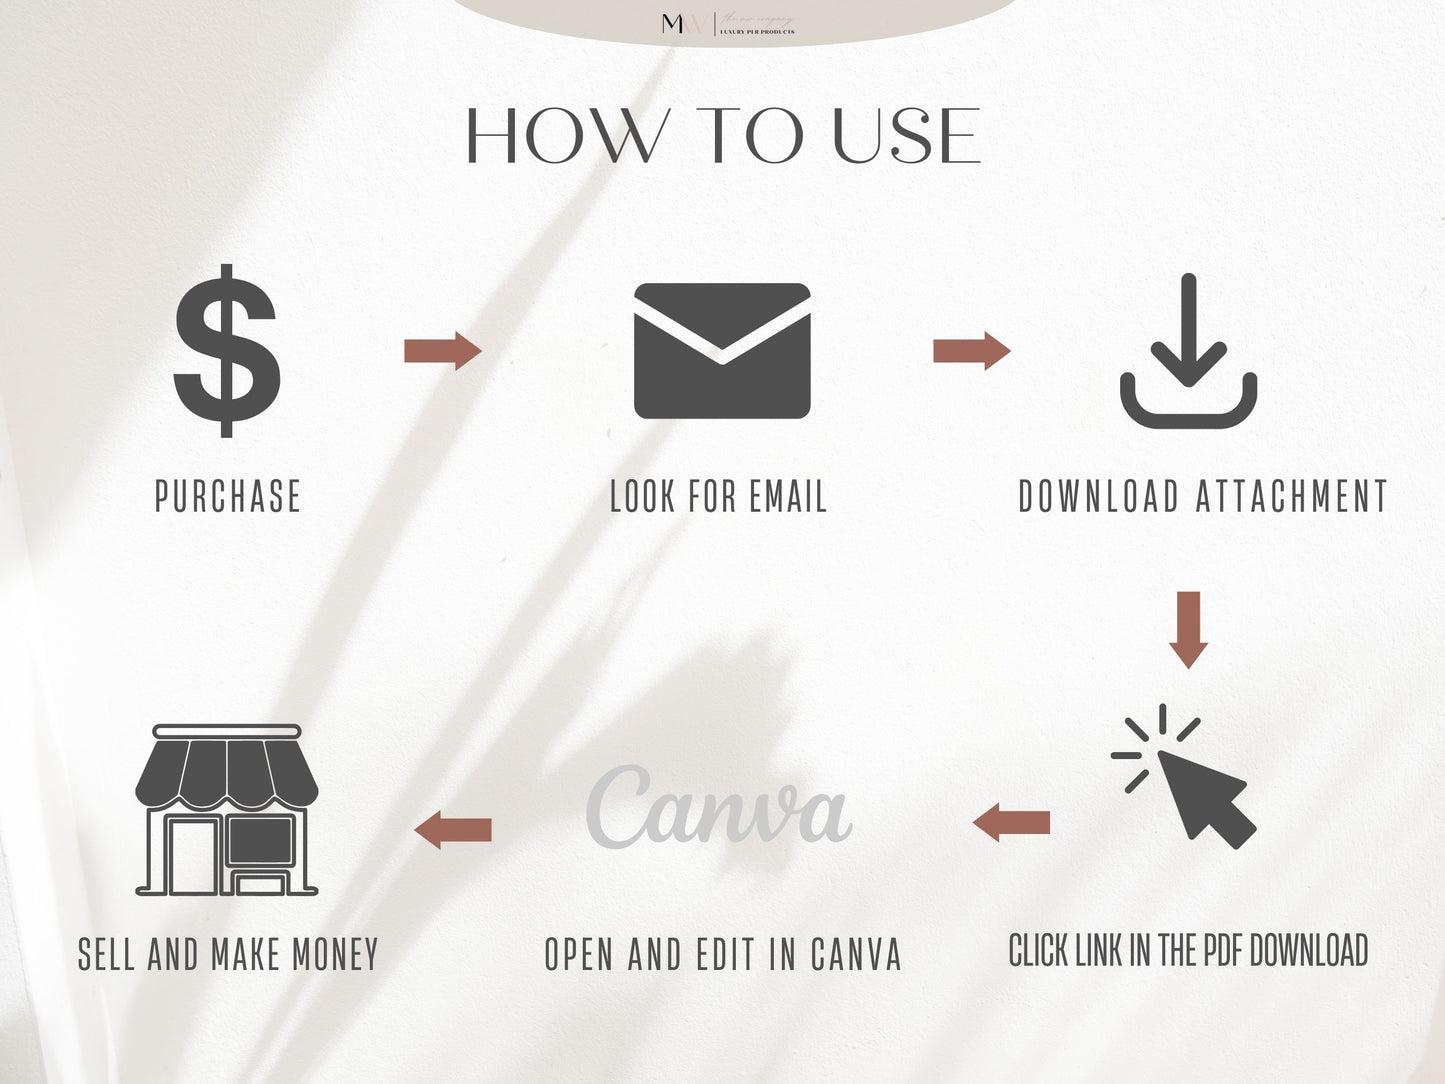 how to use. Purchase, look for email, download attachment, click link, open and edit in canva, and sell and make money